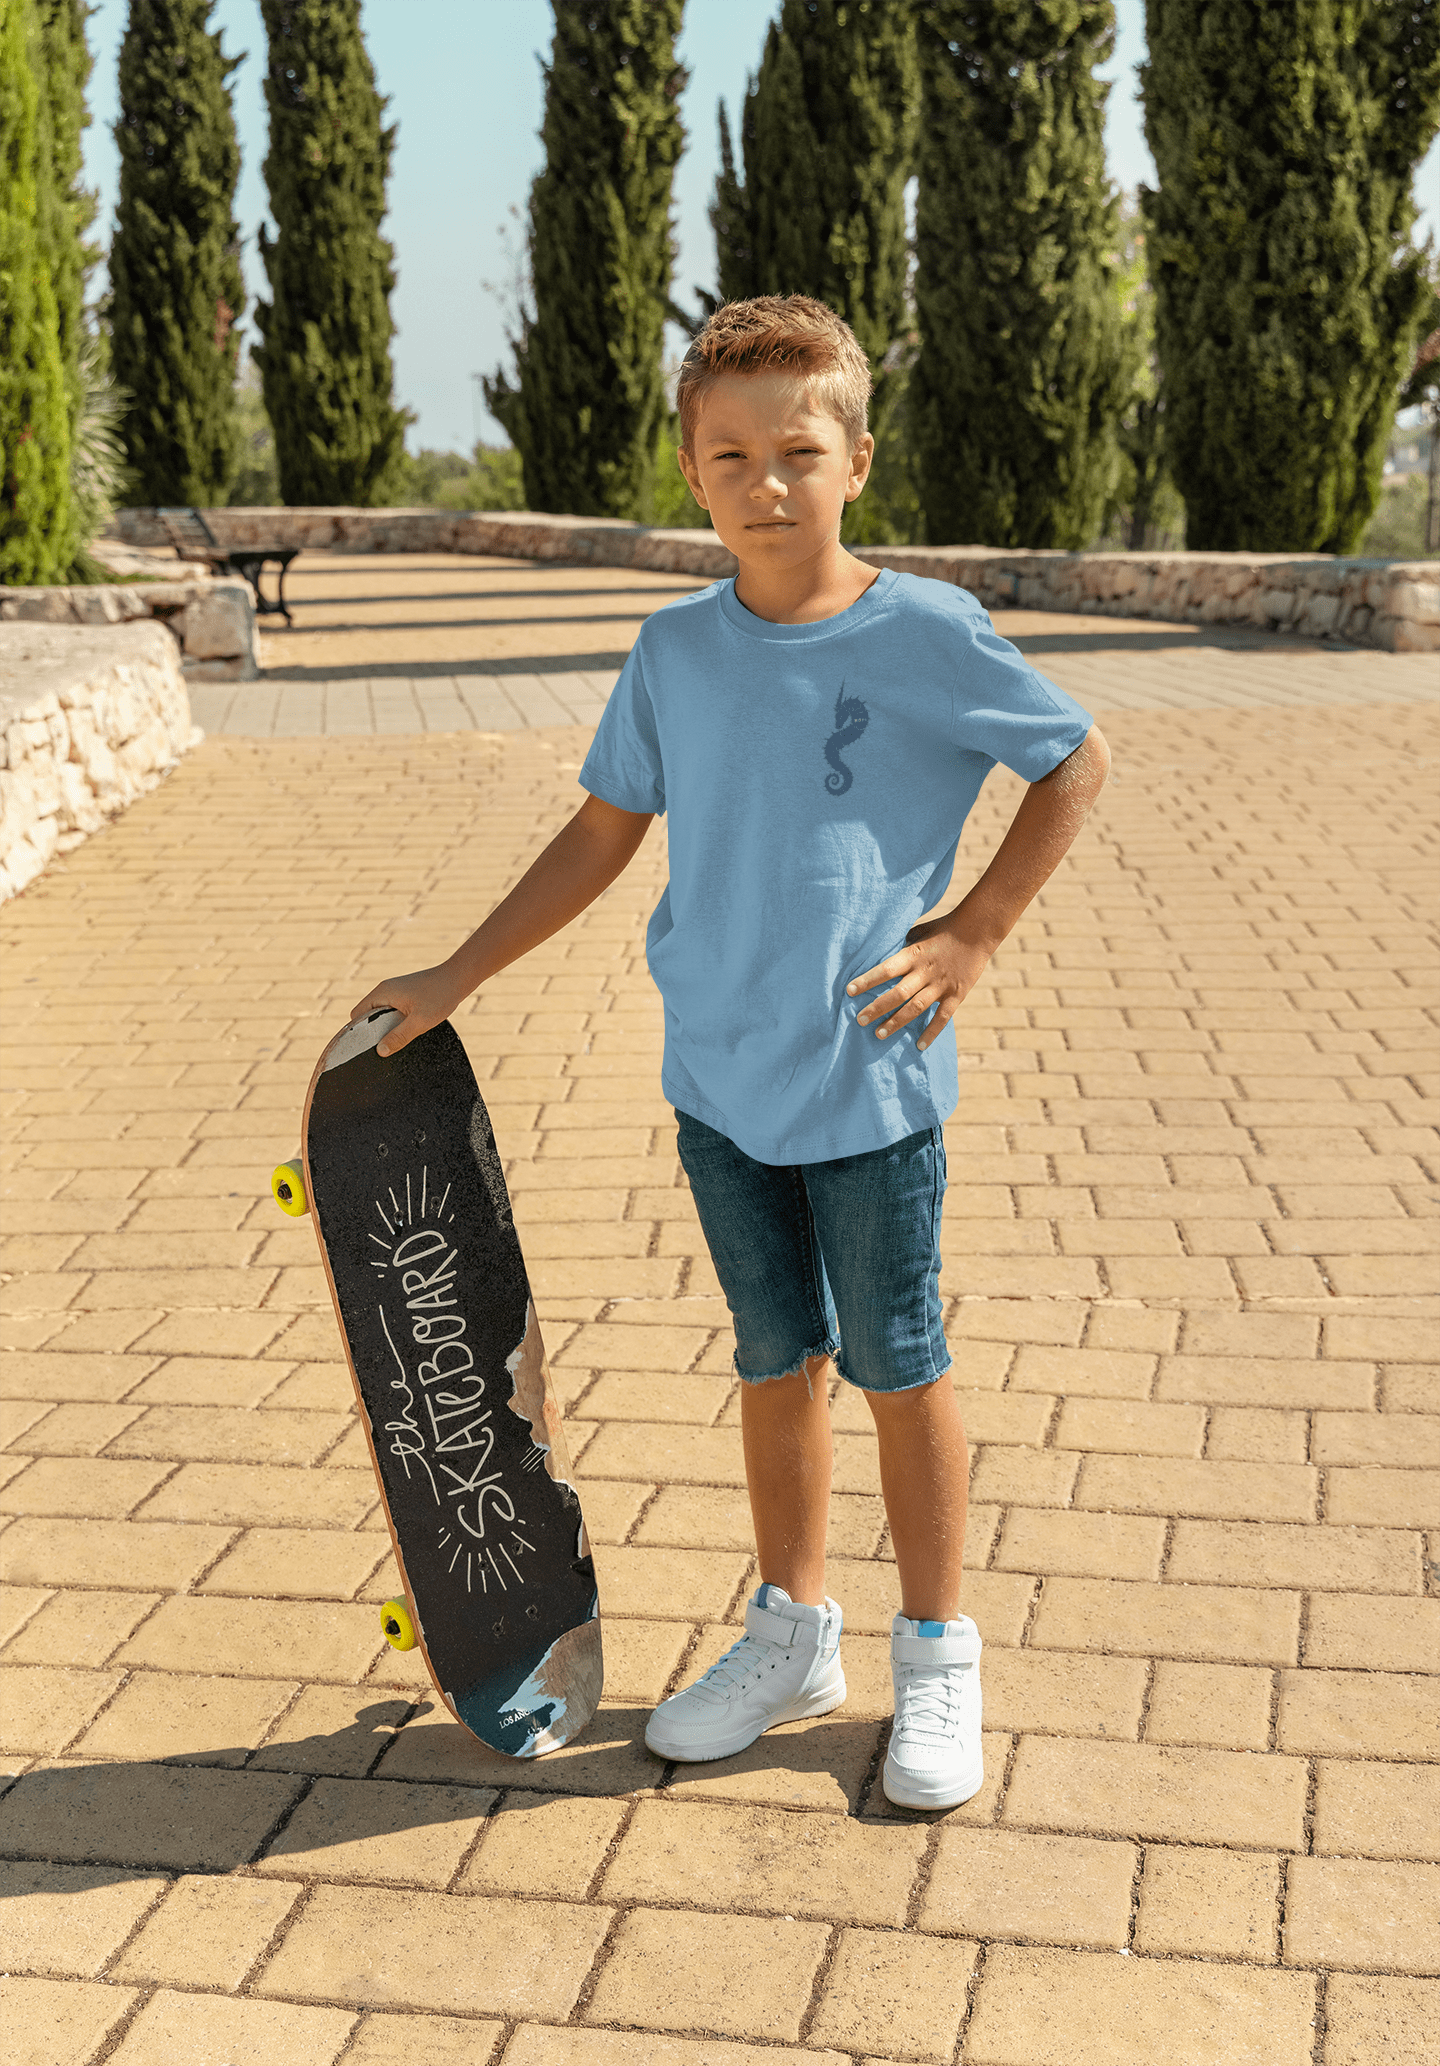 heathered-t-shirt-mockup-featuring-a-serious-boy-with-a-skateboard-m18522-r-el2-min